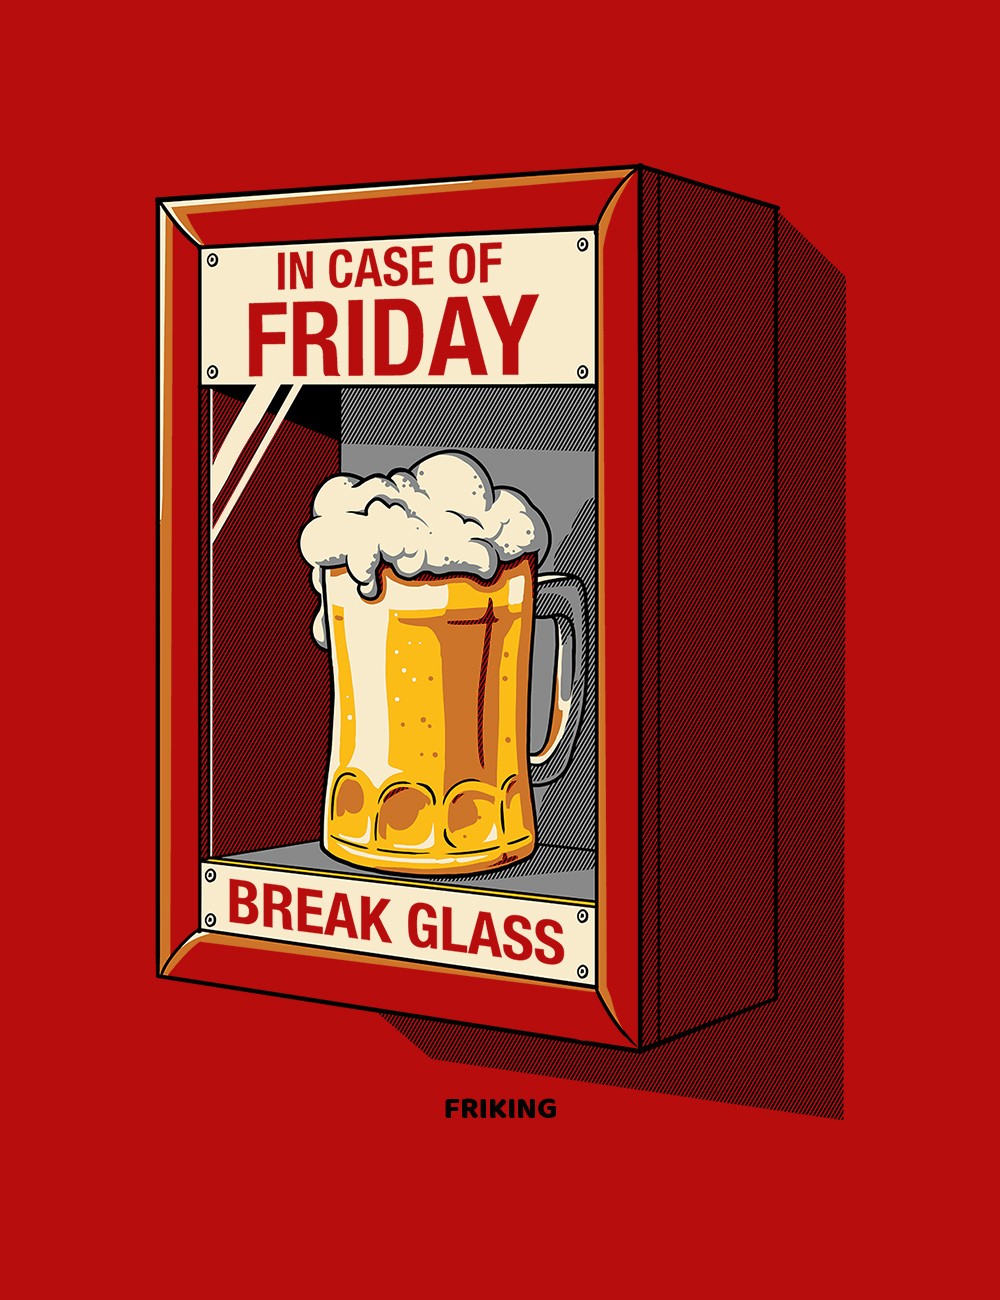 In case of friday